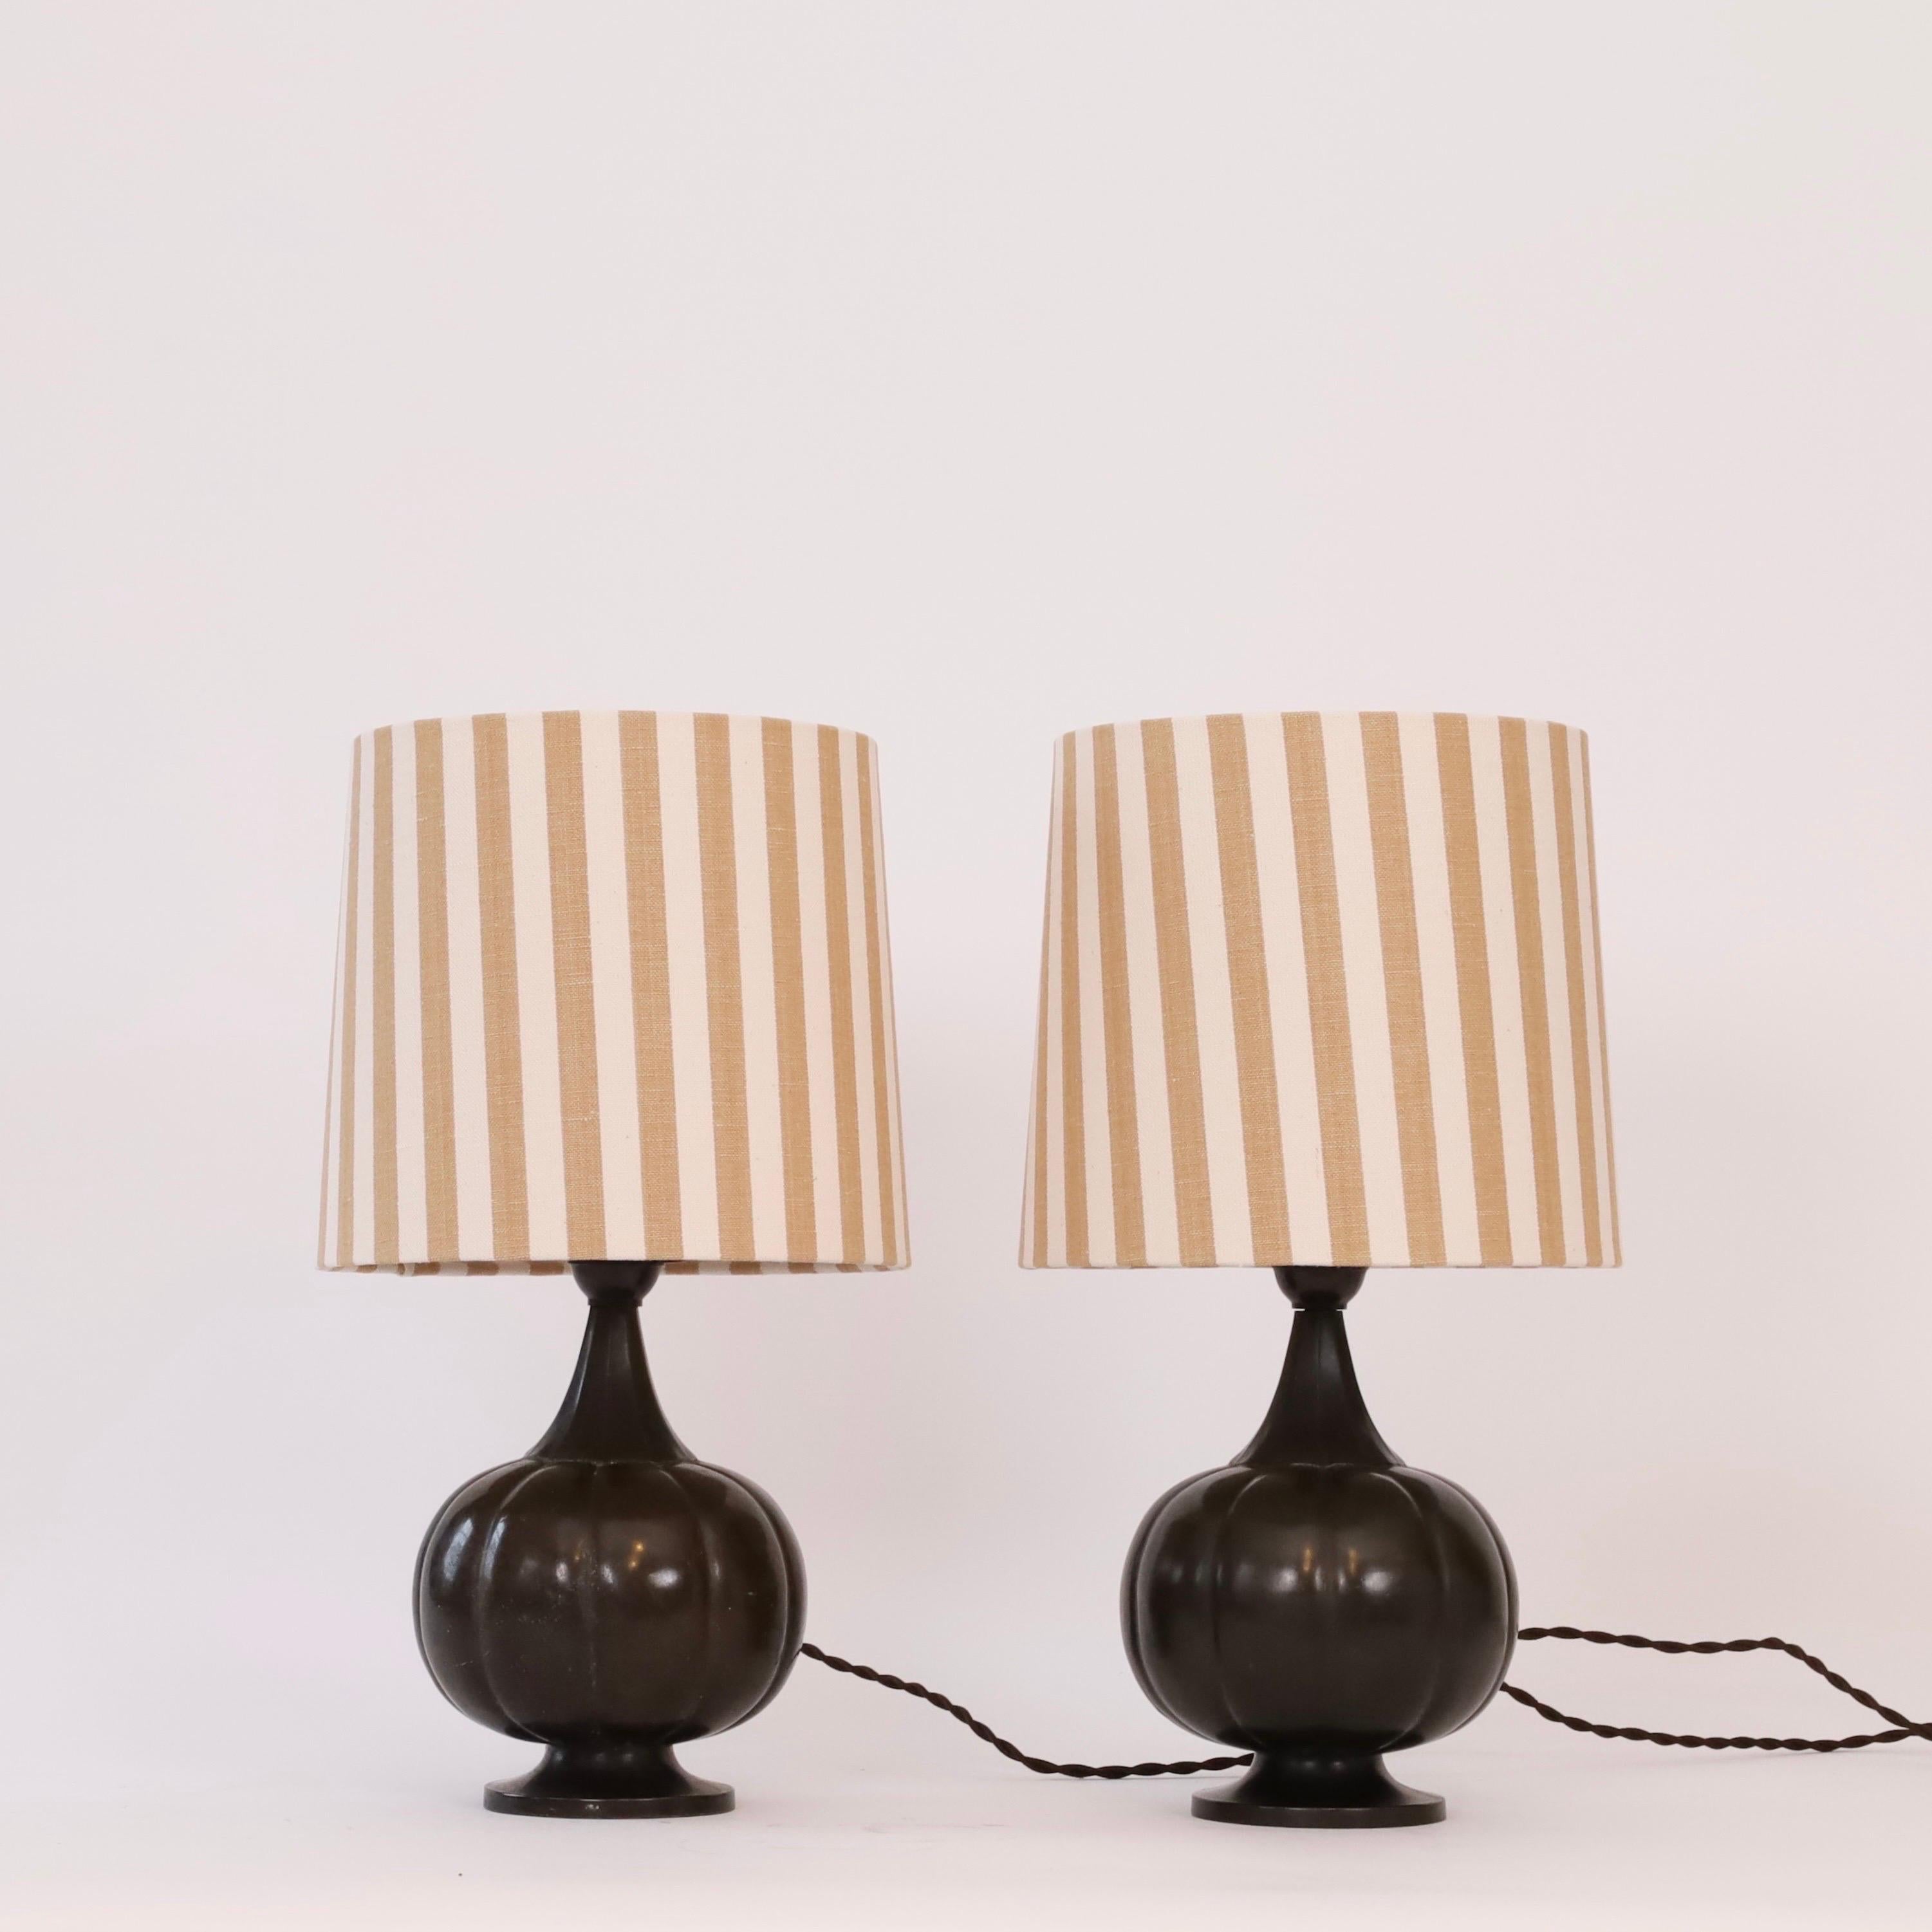 Set of round Just Andersen Table Lamps, 1920s, Denmark For Sale 4